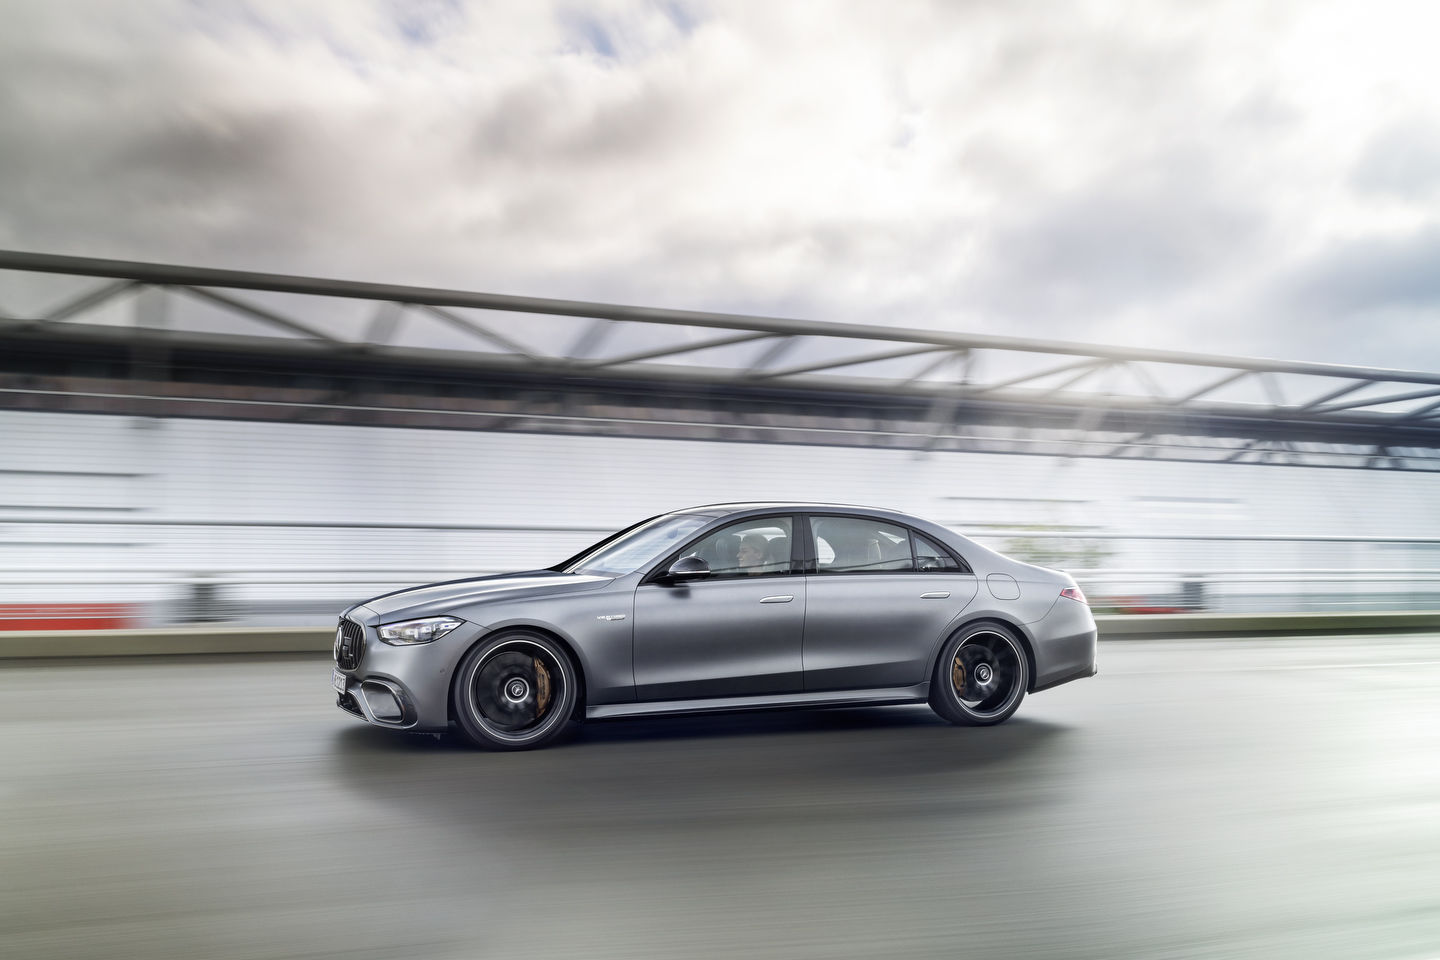 The new Mercedes-AMG S 63 AMG: Almost 800 horsepower of electrified performance